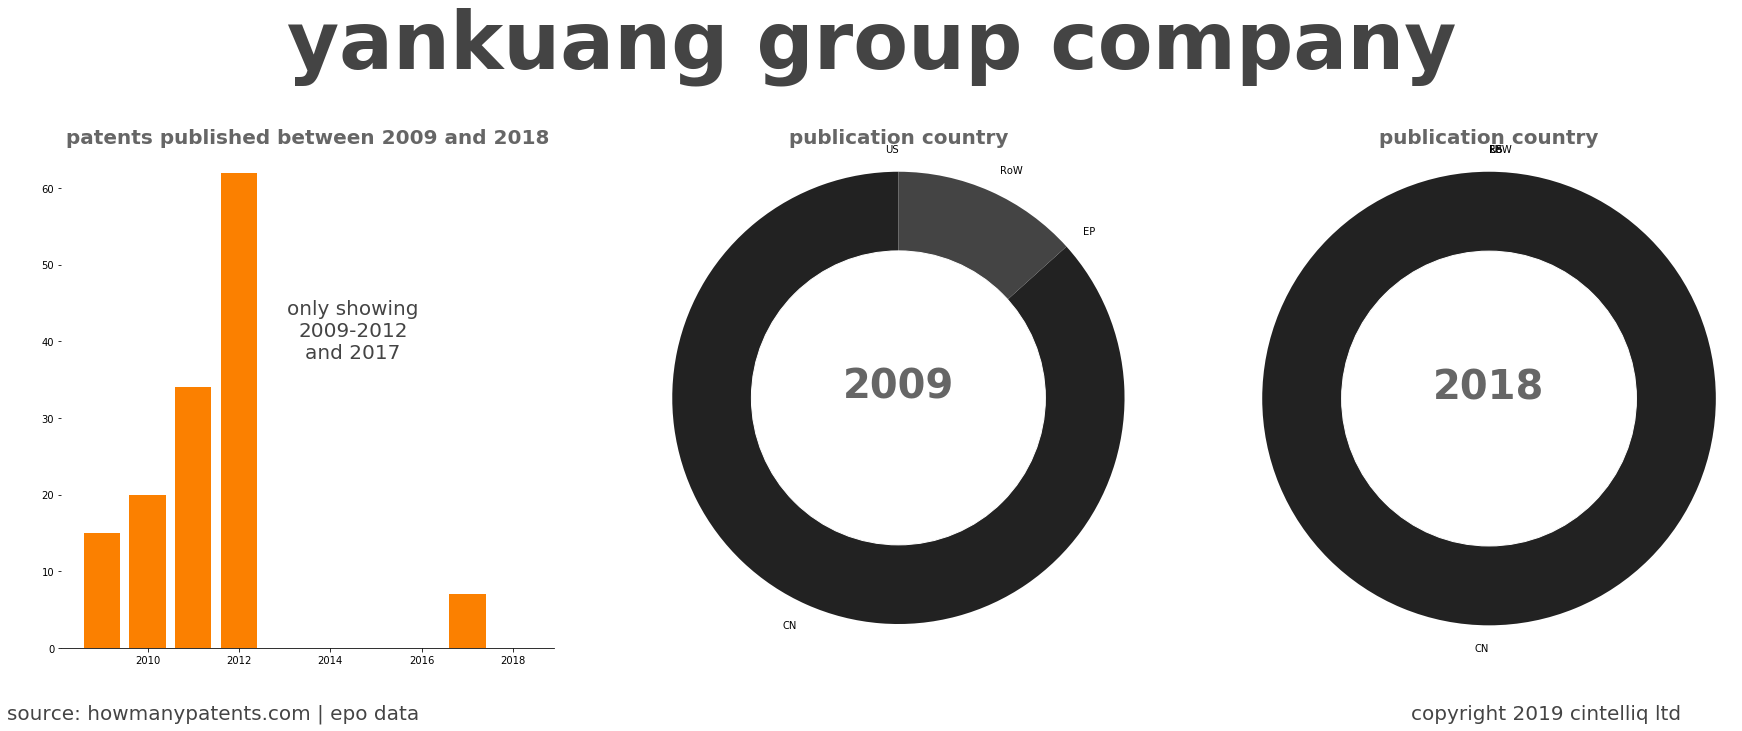 summary of patents for Yankuang Group Company